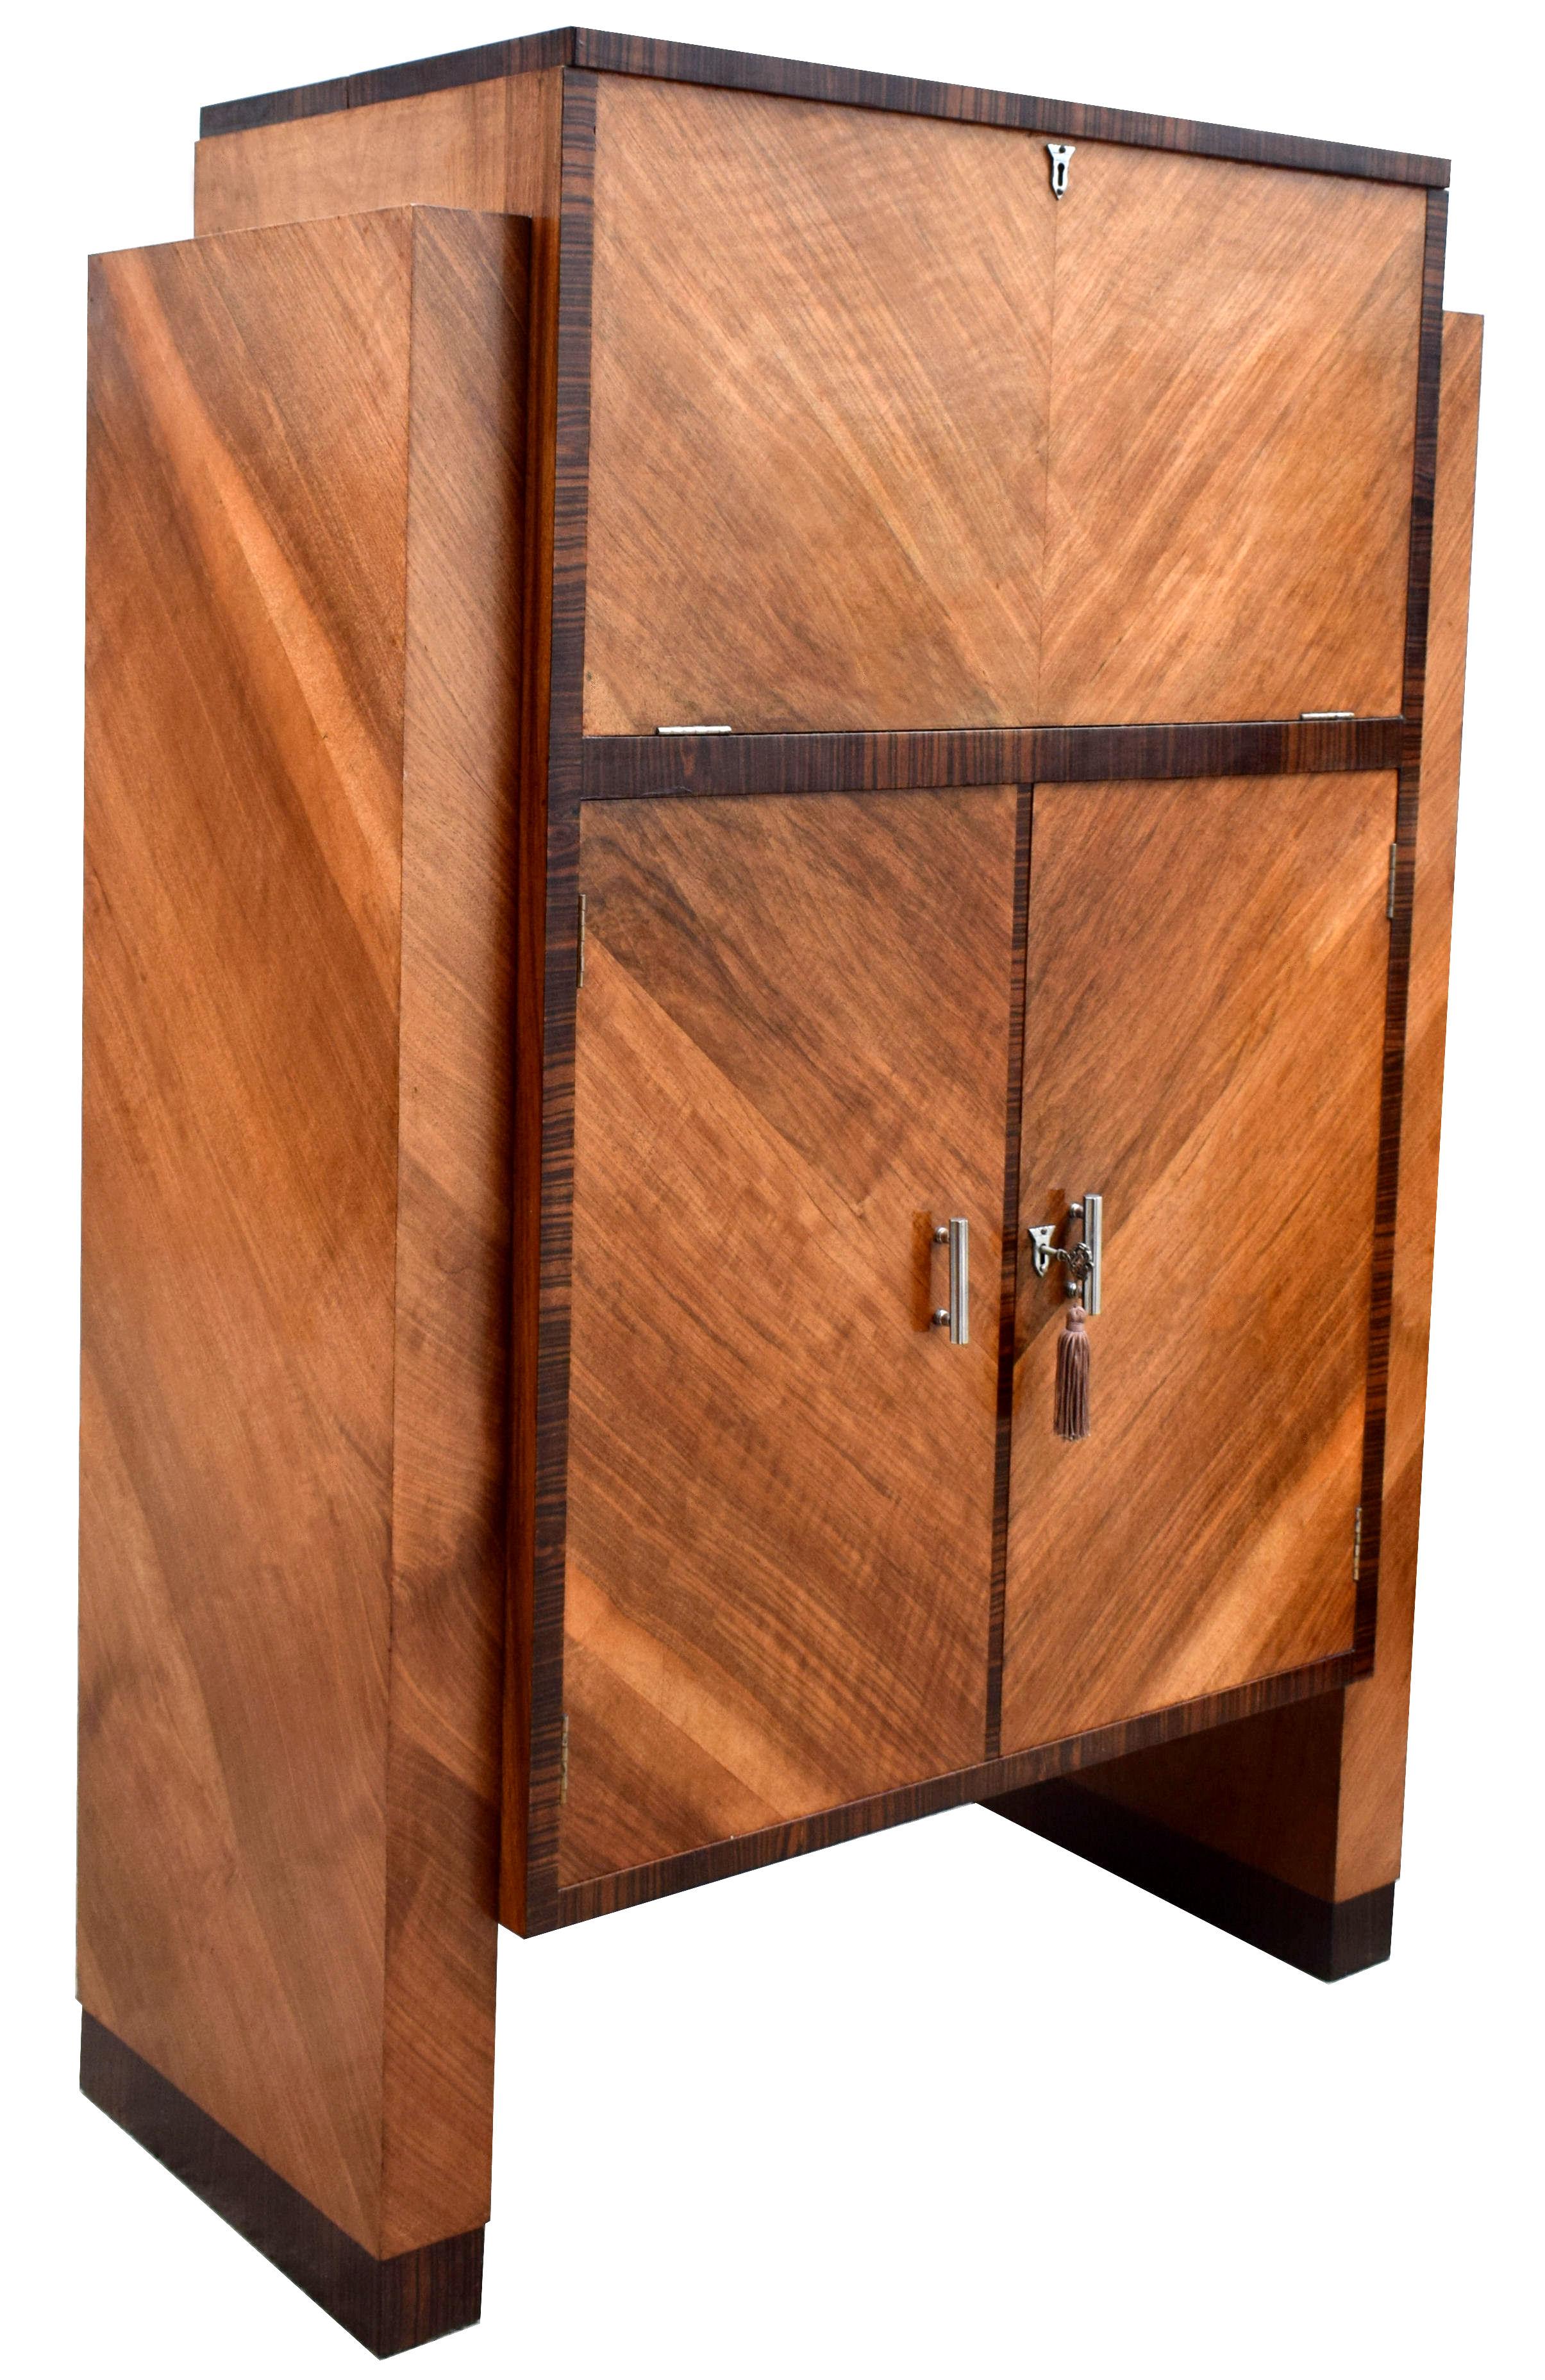 An original Art Deco modernist cocktail cabinet, dry bar in walnut & Macassar ebony, circa 1930 originating from England. Every Deco interior should have one of these! Features a drop down top which reveals a mirrored interior which acts as storage